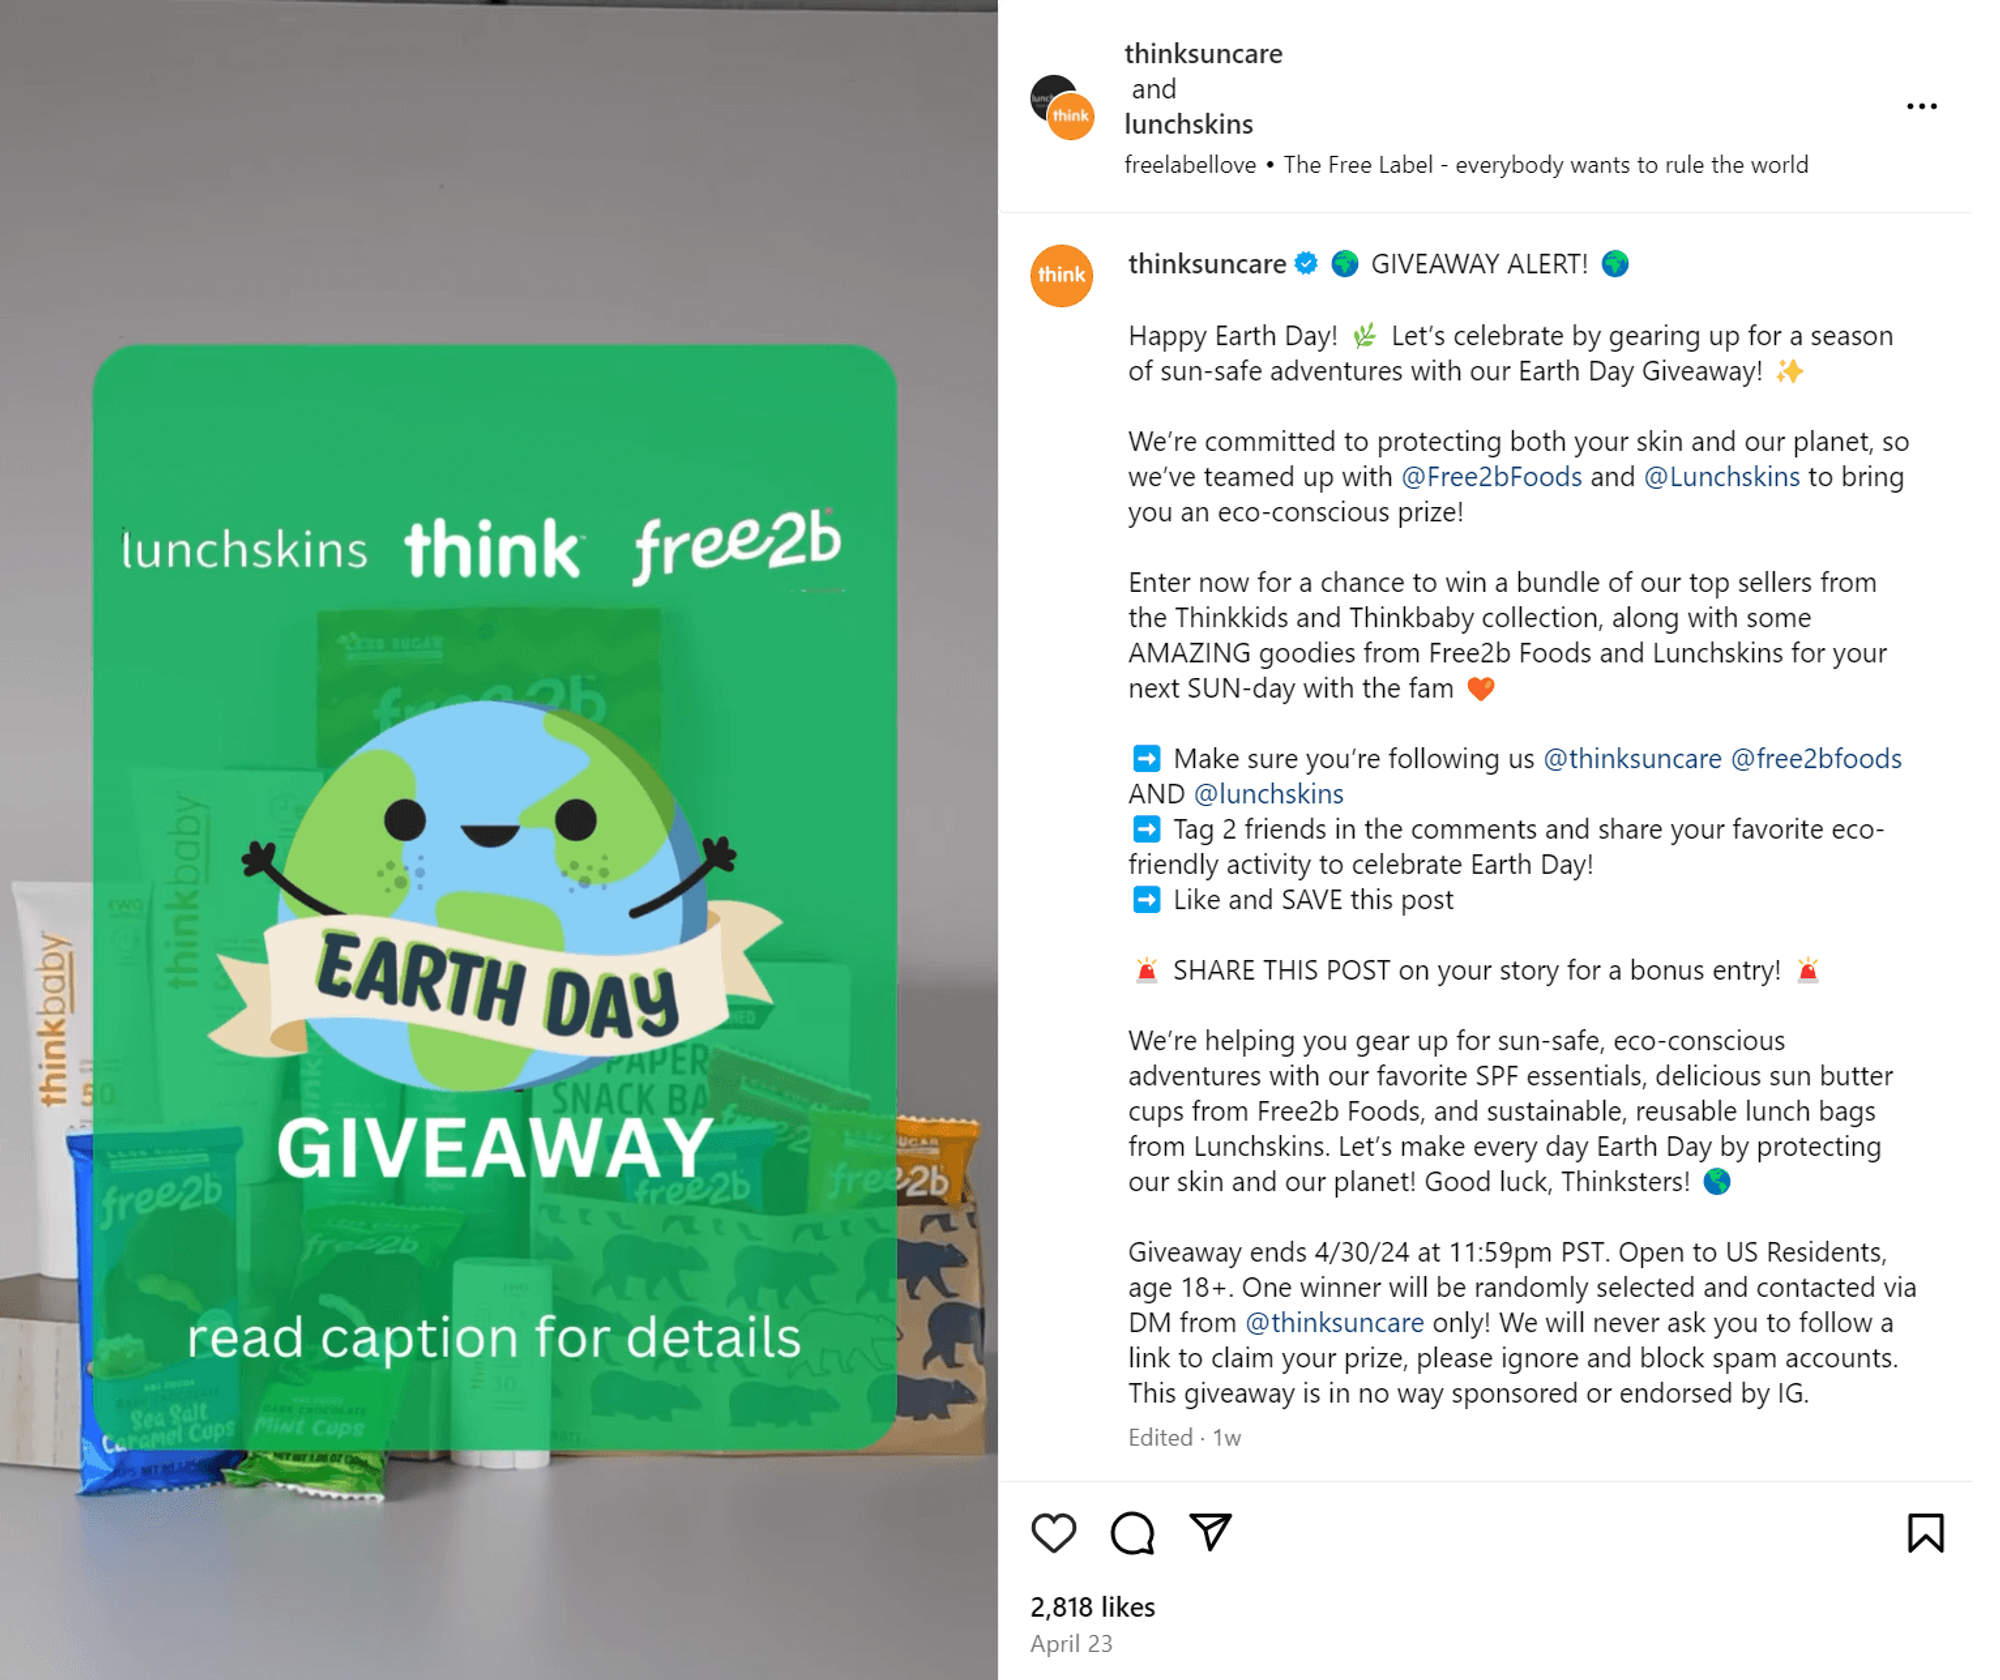 Think Sun’s and Lunchskins’ collaboration on a giveaway contest